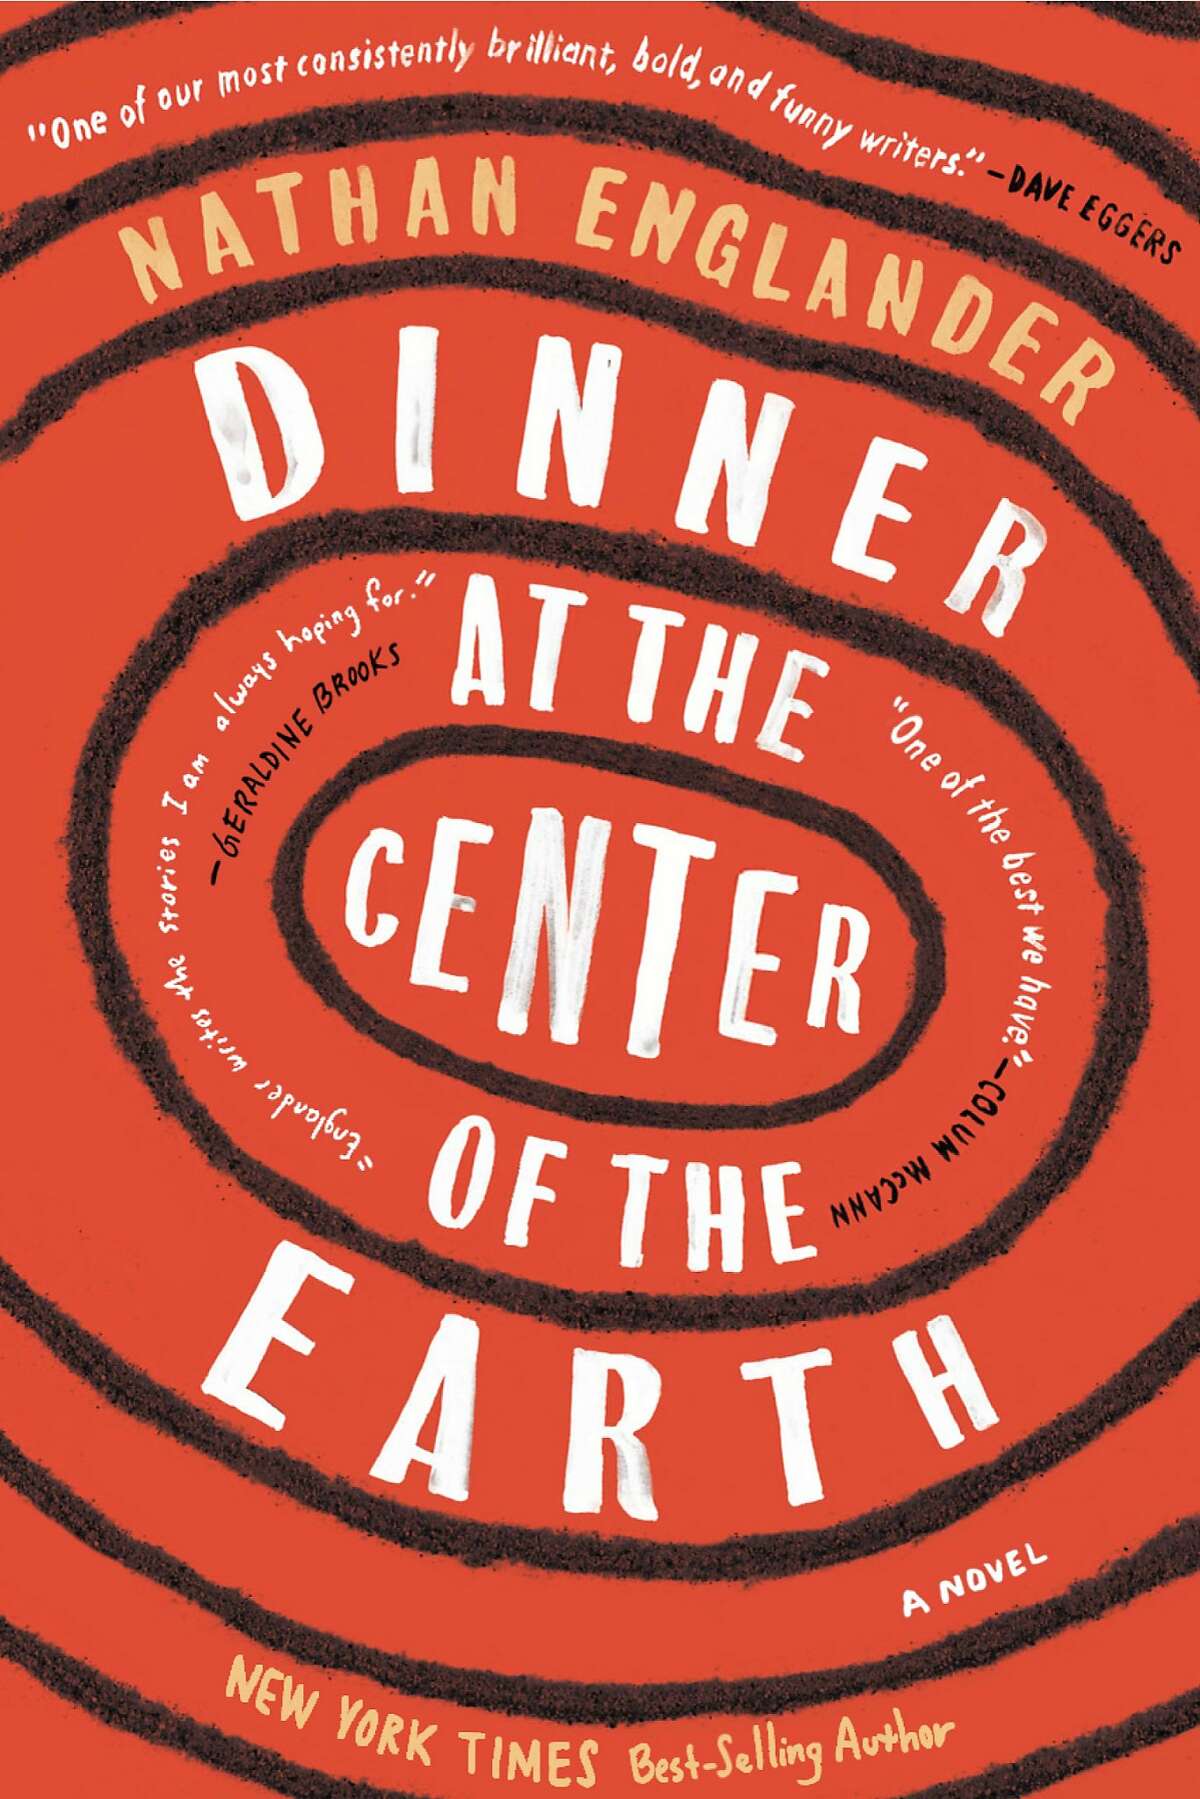 "Dinner at the Center of the Earth"